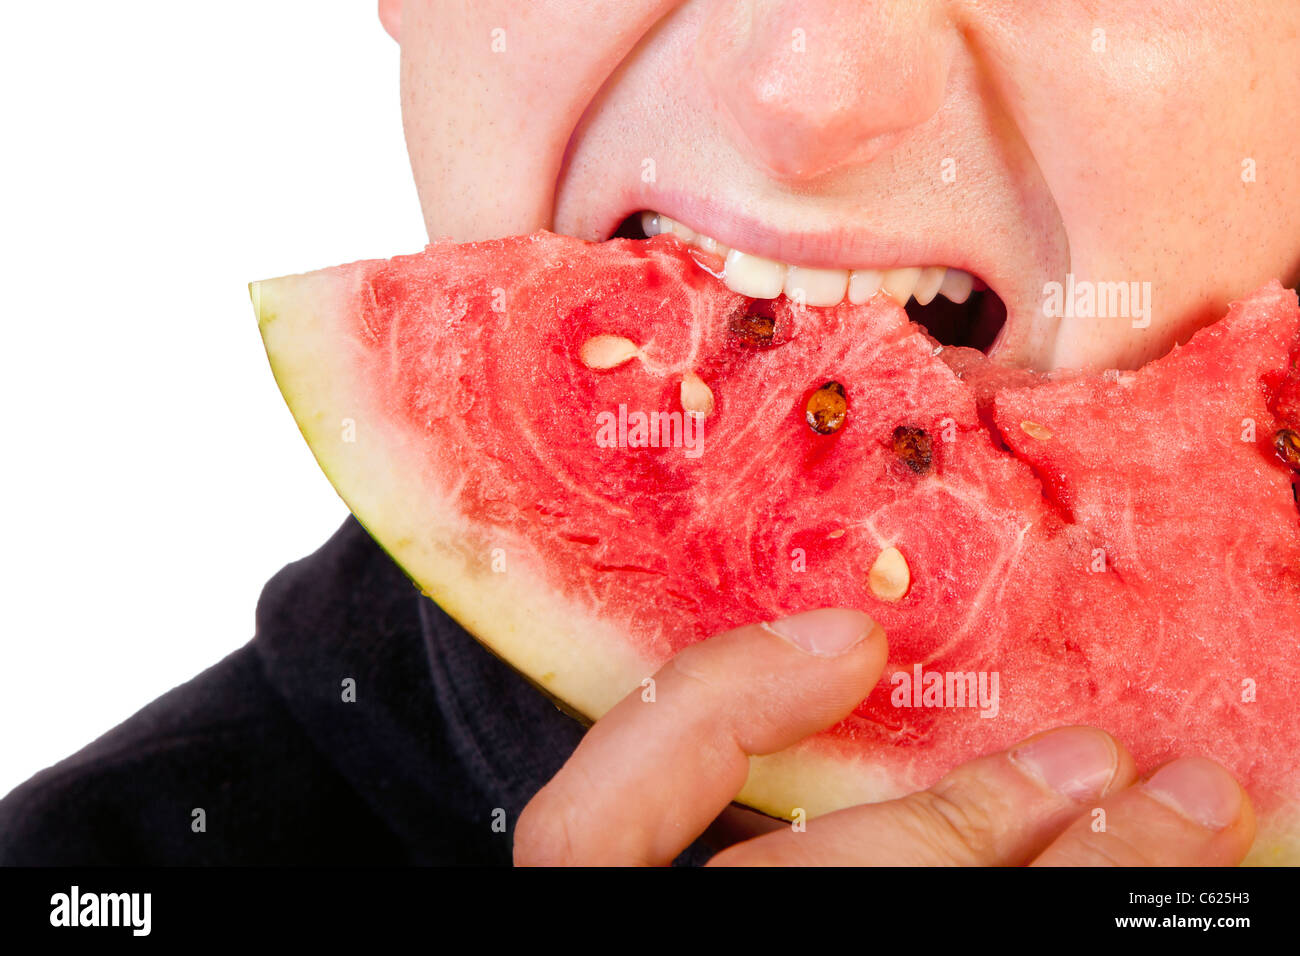 Man eating watermelon slice isolated on white Stock Photo